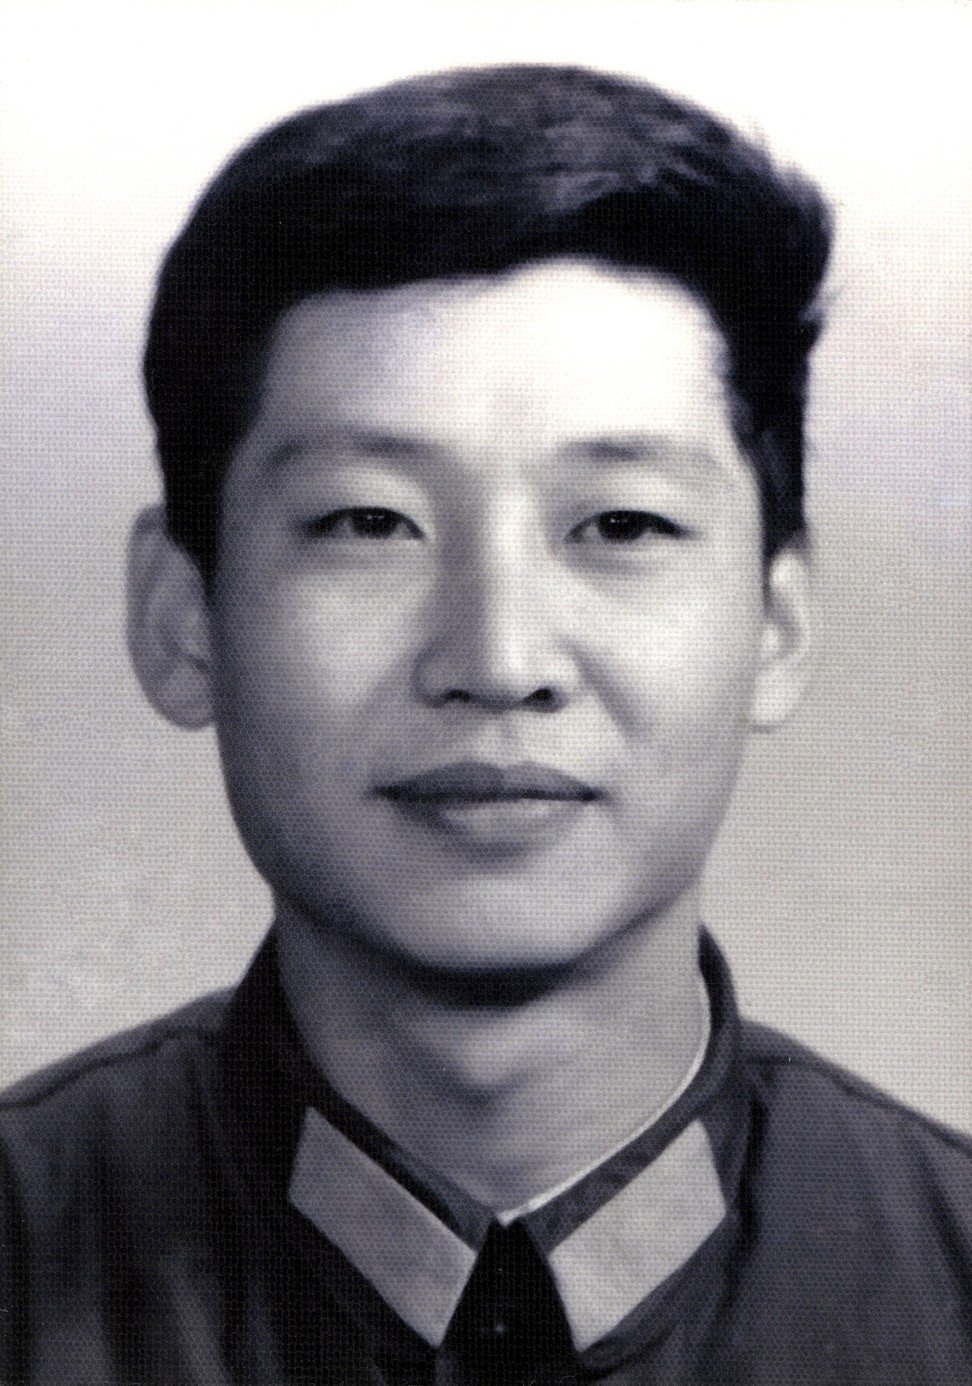 This 1979 photo shows Xi Jinping when he worked for the General Office of the Central Military Commission. Photo: Xinhua